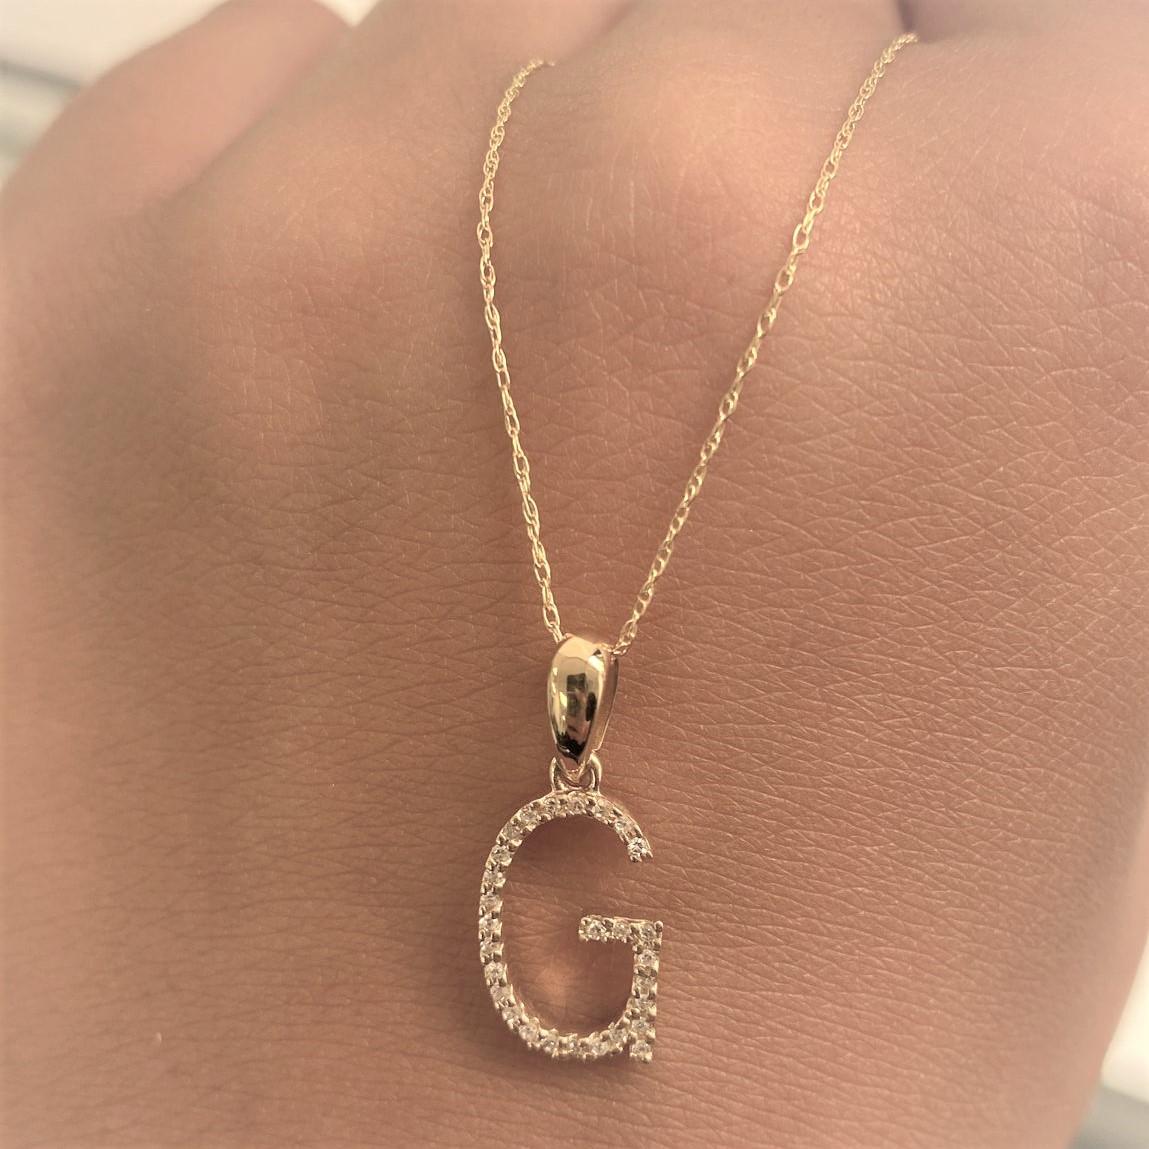 Alphabet Initial Pendant Necklace: Beautiful gold necklace perfectly sized at 16-18 inches in chain length an initial diameter 13mm featuring round diamonds between 0.09 ct - 0.12, allowing you to show off your name, new last name or alma mater.
